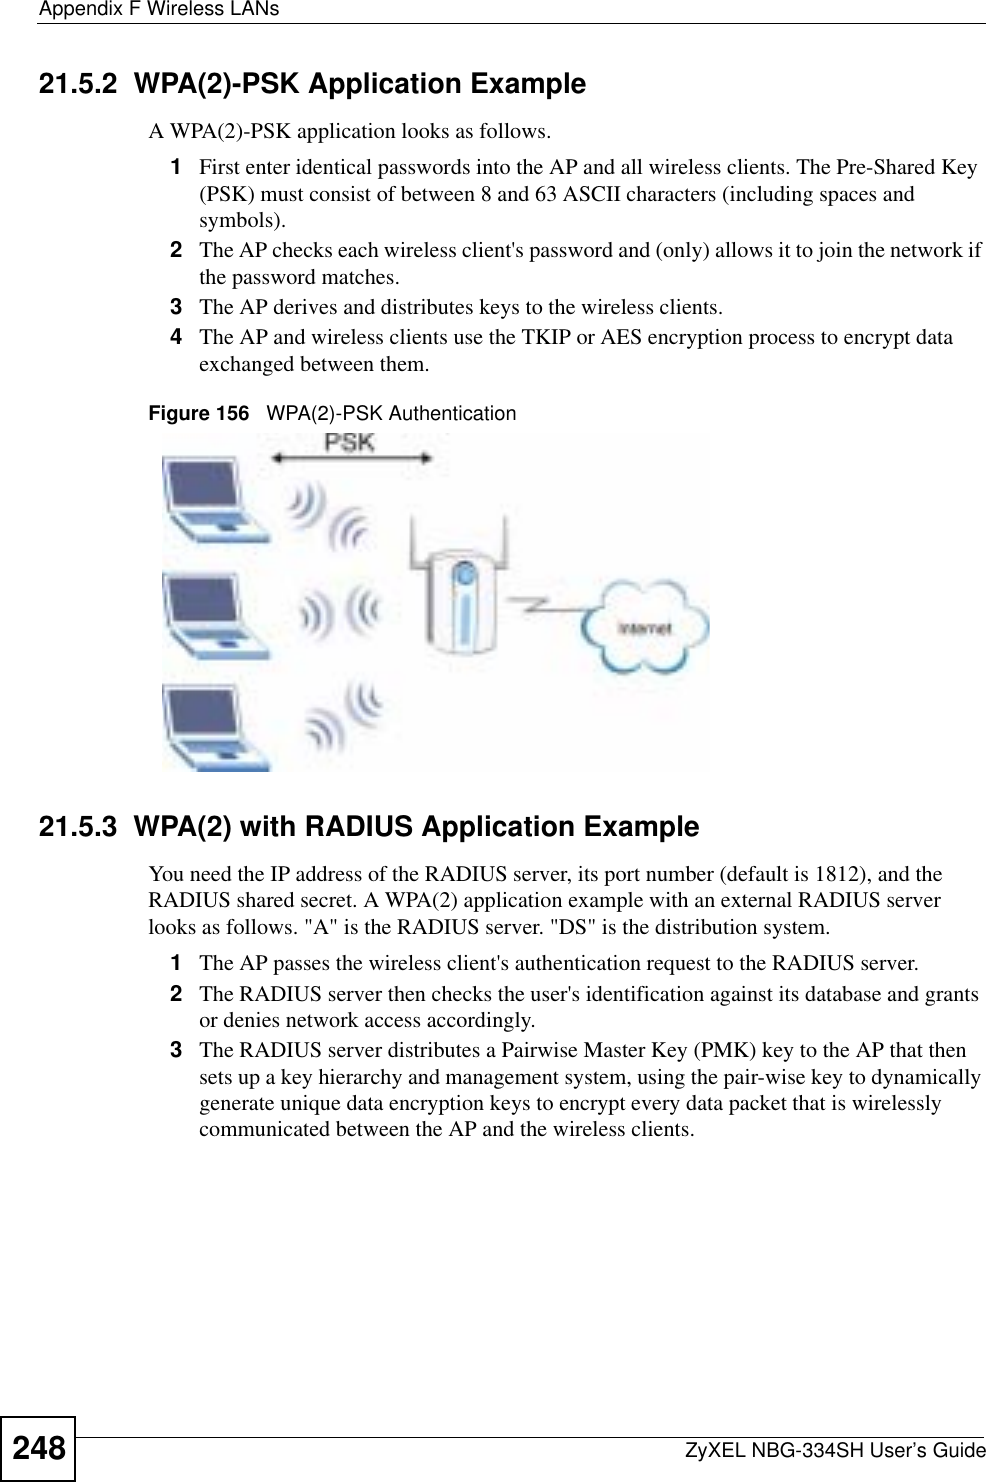 Appendix F Wireless LANsZyXEL NBG-334SH User’s Guide24821.5.2  WPA(2)-PSK Application ExampleA WPA(2)-PSK application looks as follows.1First enter identical passwords into the AP and all wireless clients. The Pre-Shared Key (PSK) must consist of between 8 and 63 ASCII characters (including spaces and symbols).2The AP checks each wireless client&apos;s password and (only) allows it to join the network if the password matches.3The AP derives and distributes keys to the wireless clients.4The AP and wireless clients use the TKIP or AES encryption process to encrypt data exchanged between them.Figure 156   WPA(2)-PSK Authentication21.5.3  WPA(2) with RADIUS Application ExampleYou need the IP address of the RADIUS server, its port number (default is 1812), and the RADIUS shared secret. A WPA(2) application example with an external RADIUS server looks as follows. &quot;A&quot; is the RADIUS server. &quot;DS&quot; is the distribution system.1The AP passes the wireless client&apos;s authentication request to the RADIUS server.2The RADIUS server then checks the user&apos;s identification against its database and grants or denies network access accordingly.3The RADIUS server distributes a Pairwise Master Key (PMK) key to the AP that then sets up a key hierarchy and management system, using the pair-wise key to dynamically generate unique data encryption keys to encrypt every data packet that is wirelessly communicated between the AP and the wireless clients. 